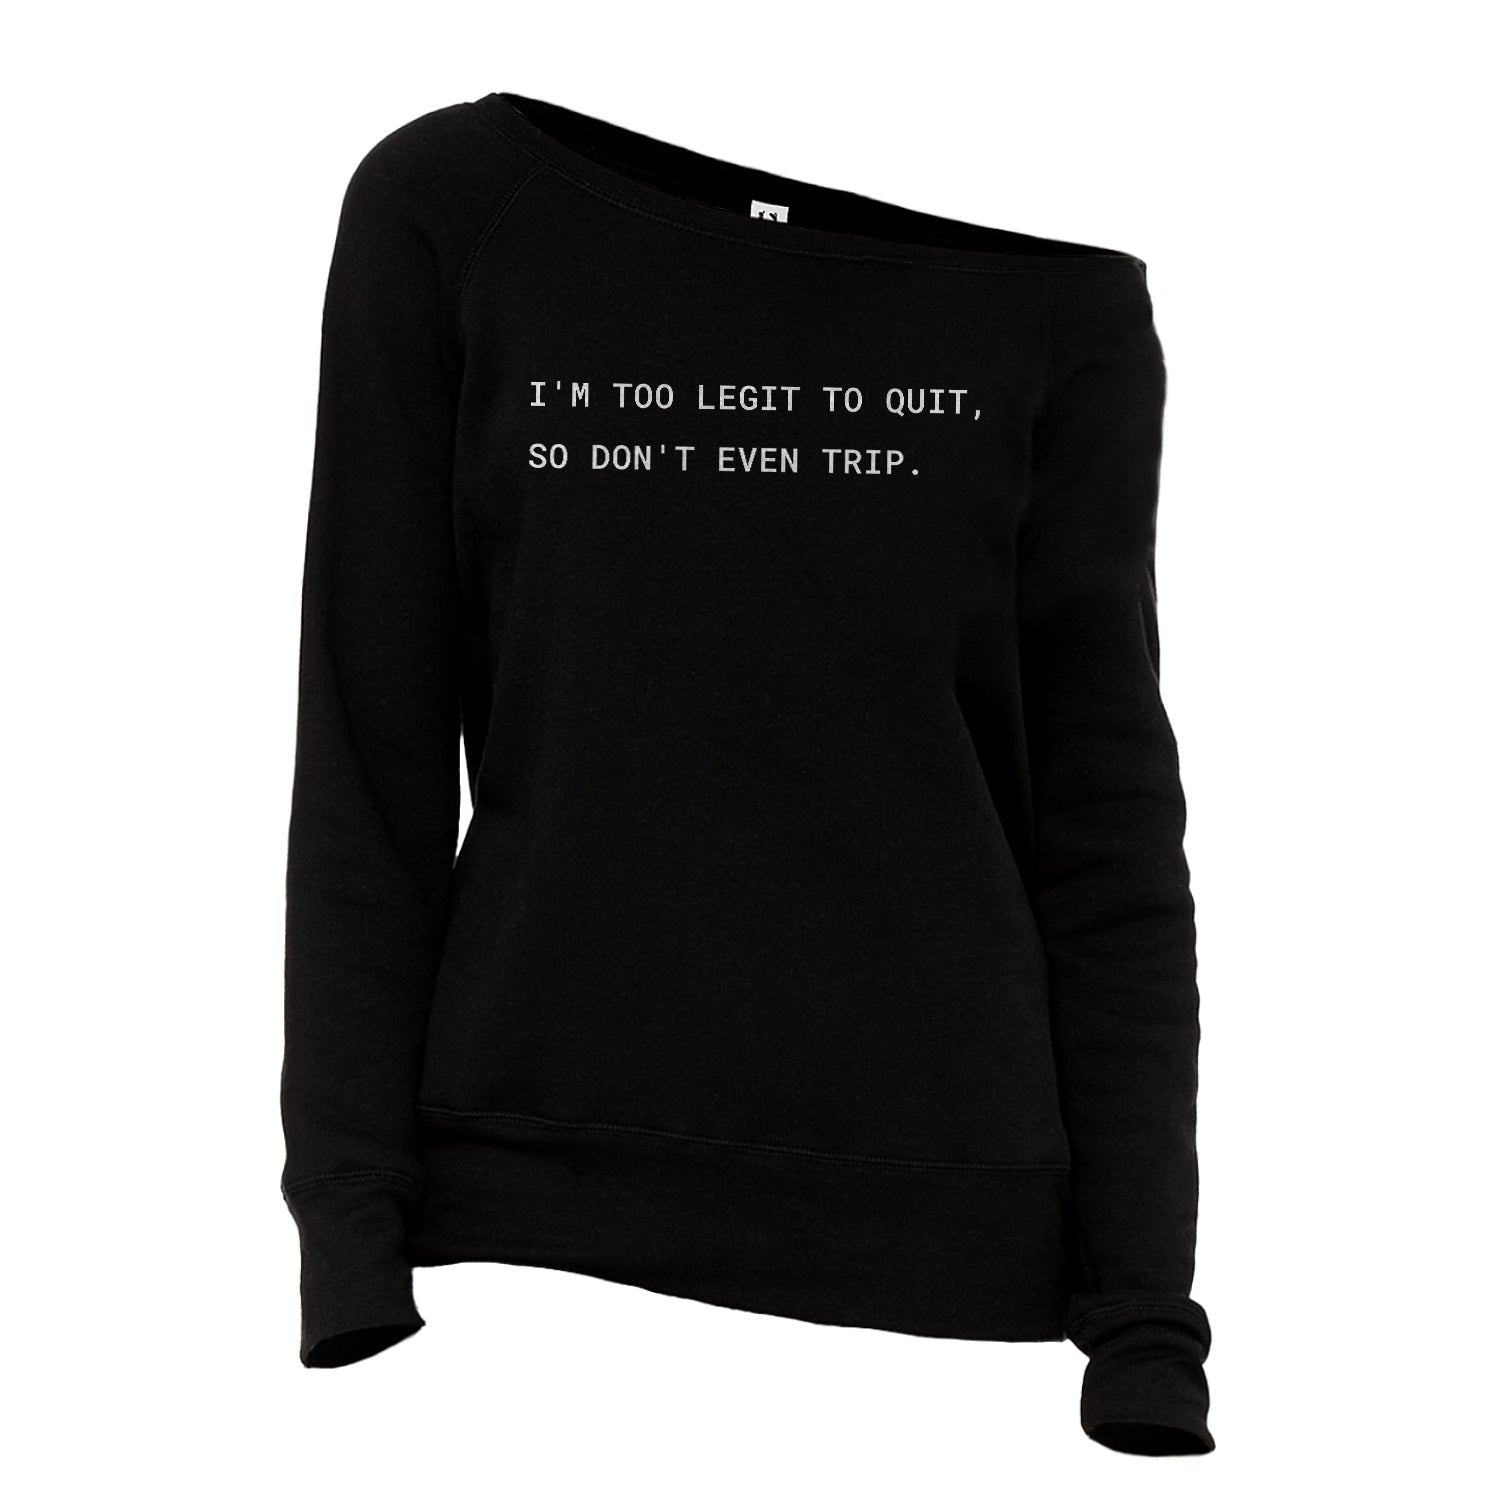 IToo Legit to Quit, So Don't Even Trip Slouchy Fleece Solid Black Image